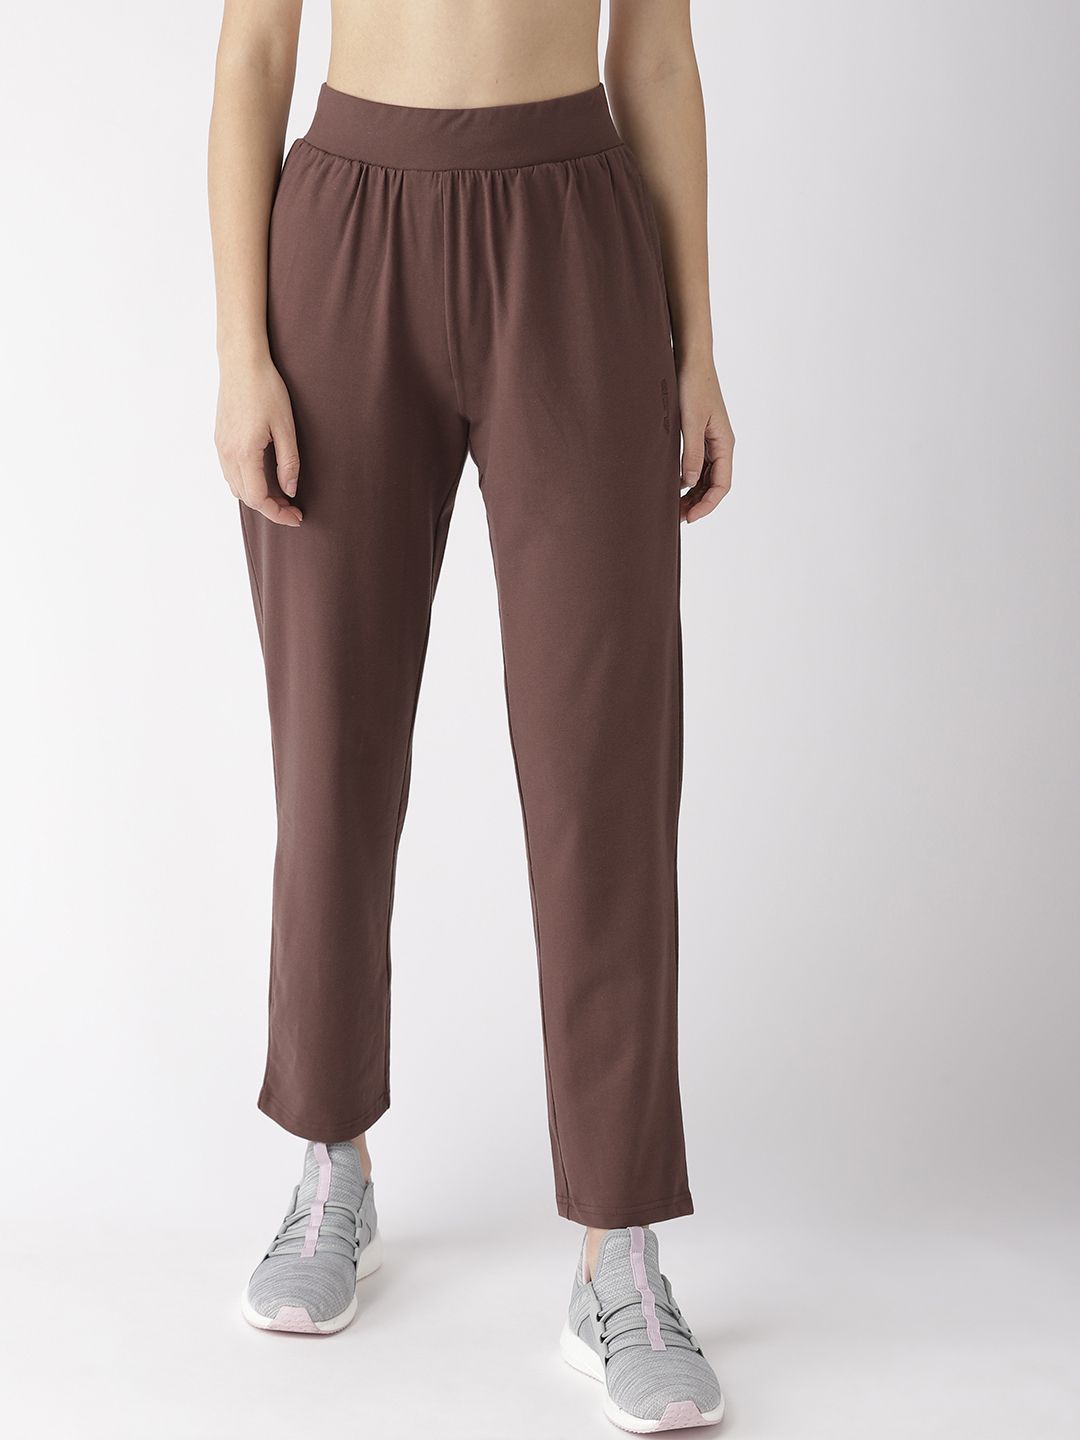 Alcis Women Solid Brown Track Pants Price in India